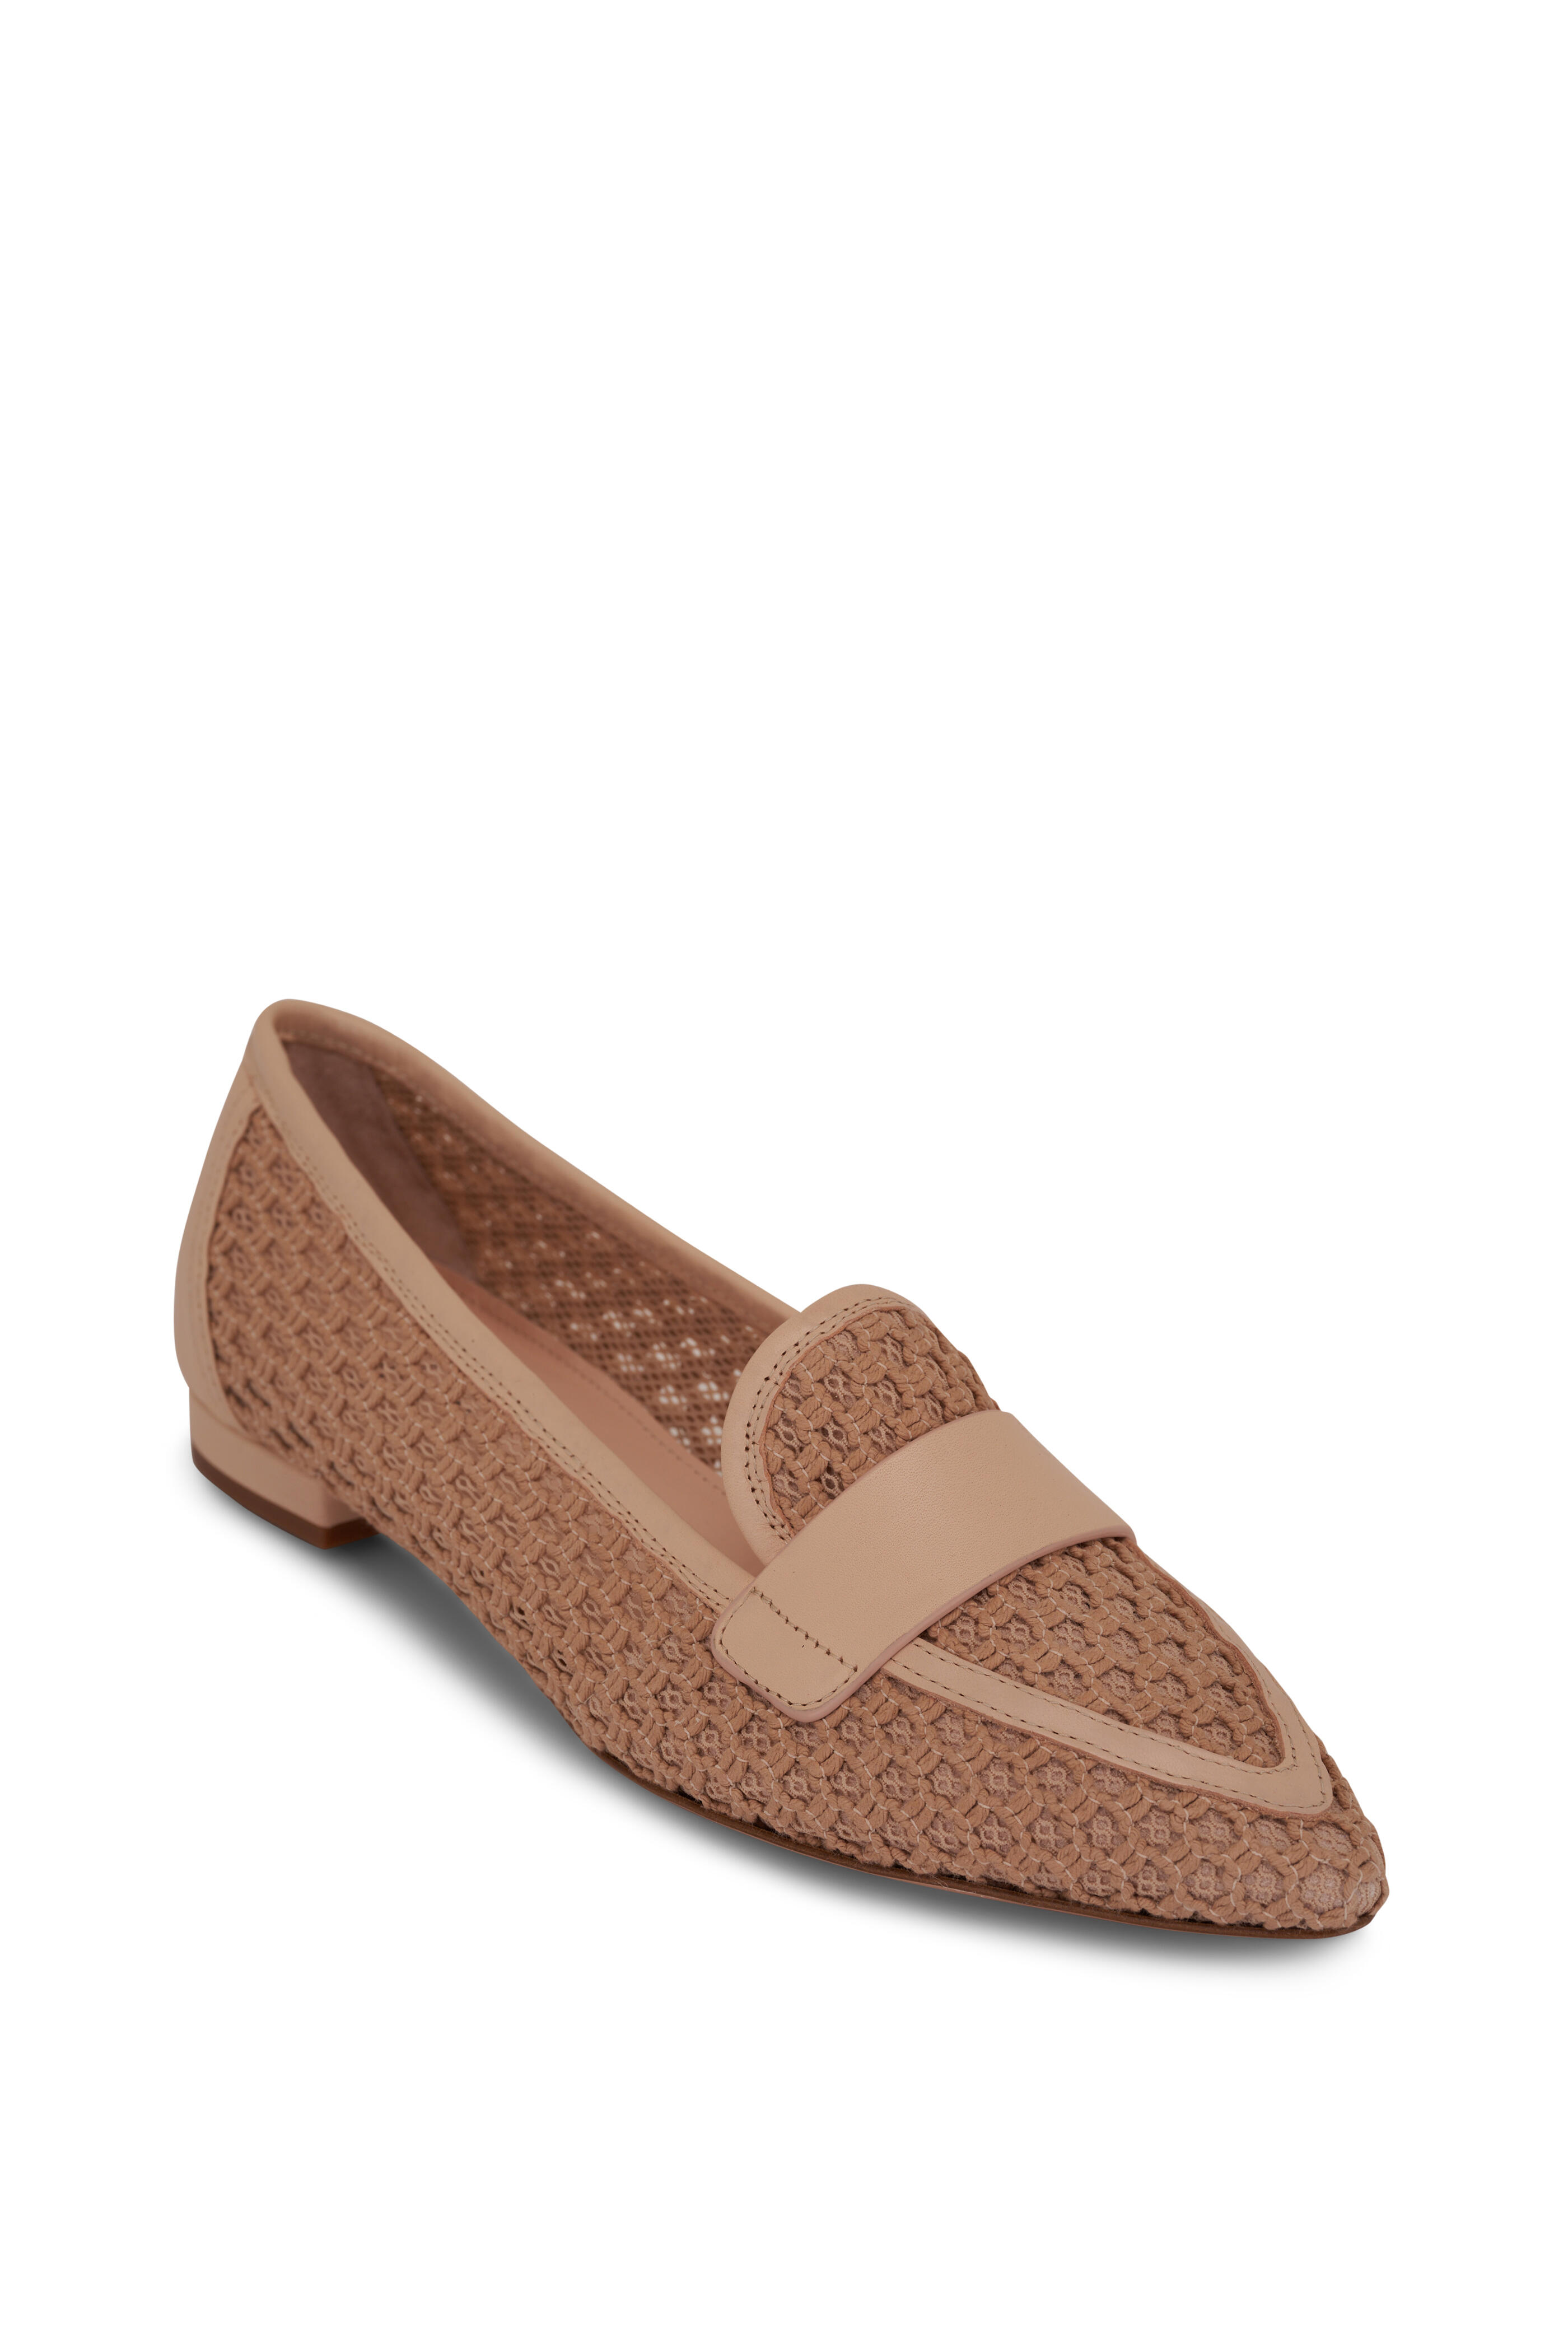 AGL - Blanca Plots Ghibli Woven Rope & Leather loafer